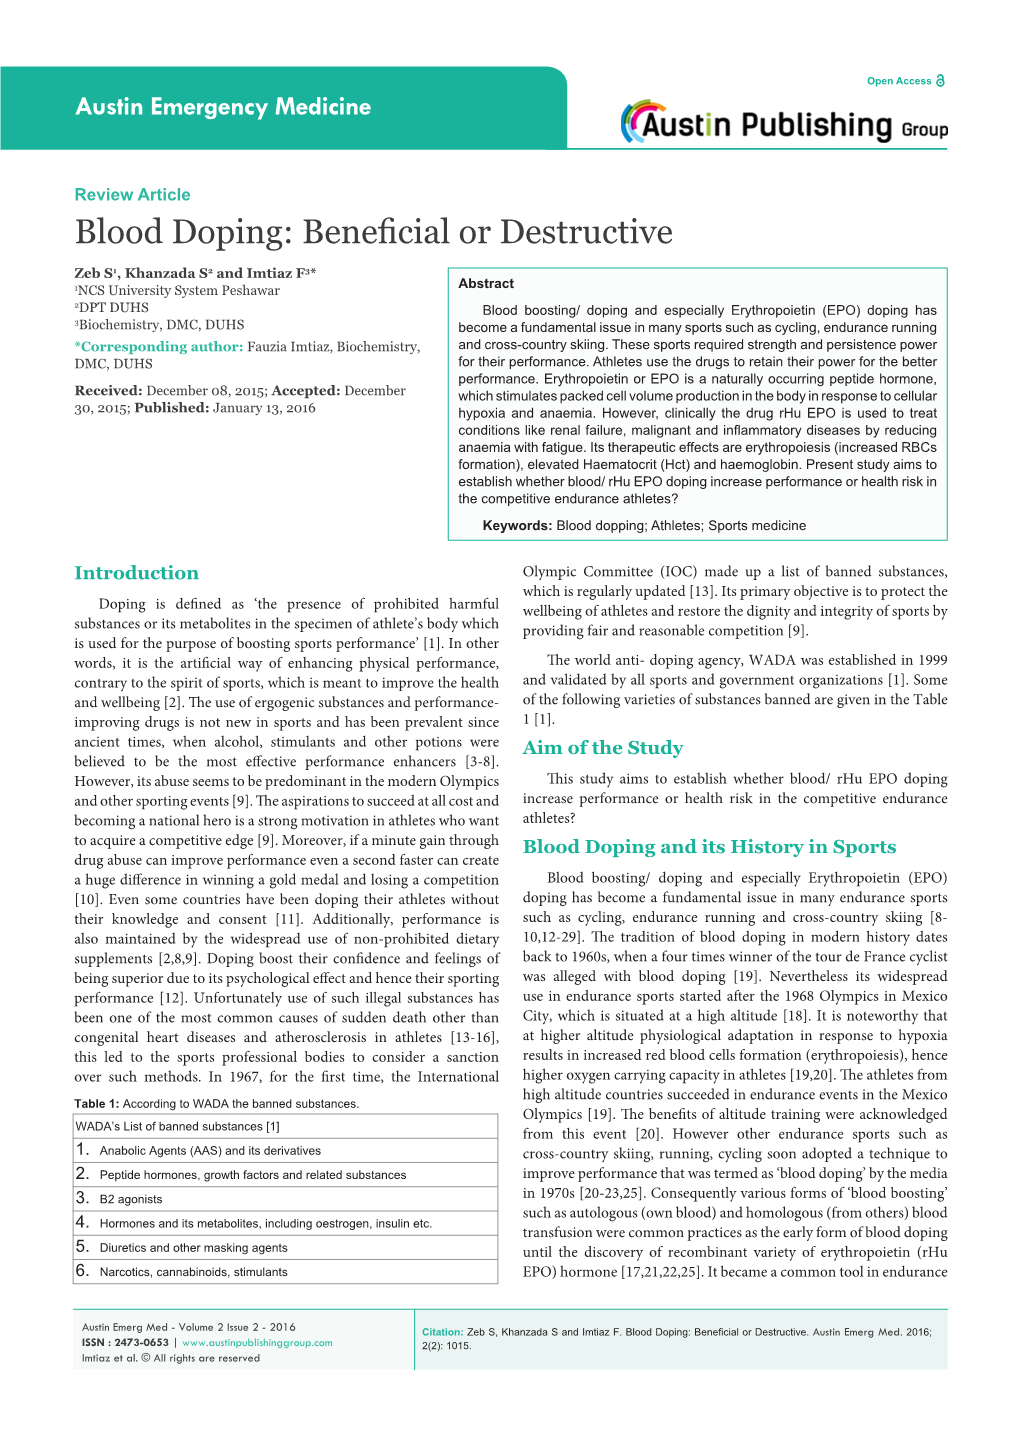 Blood Doping: Beneficial Or Destructive